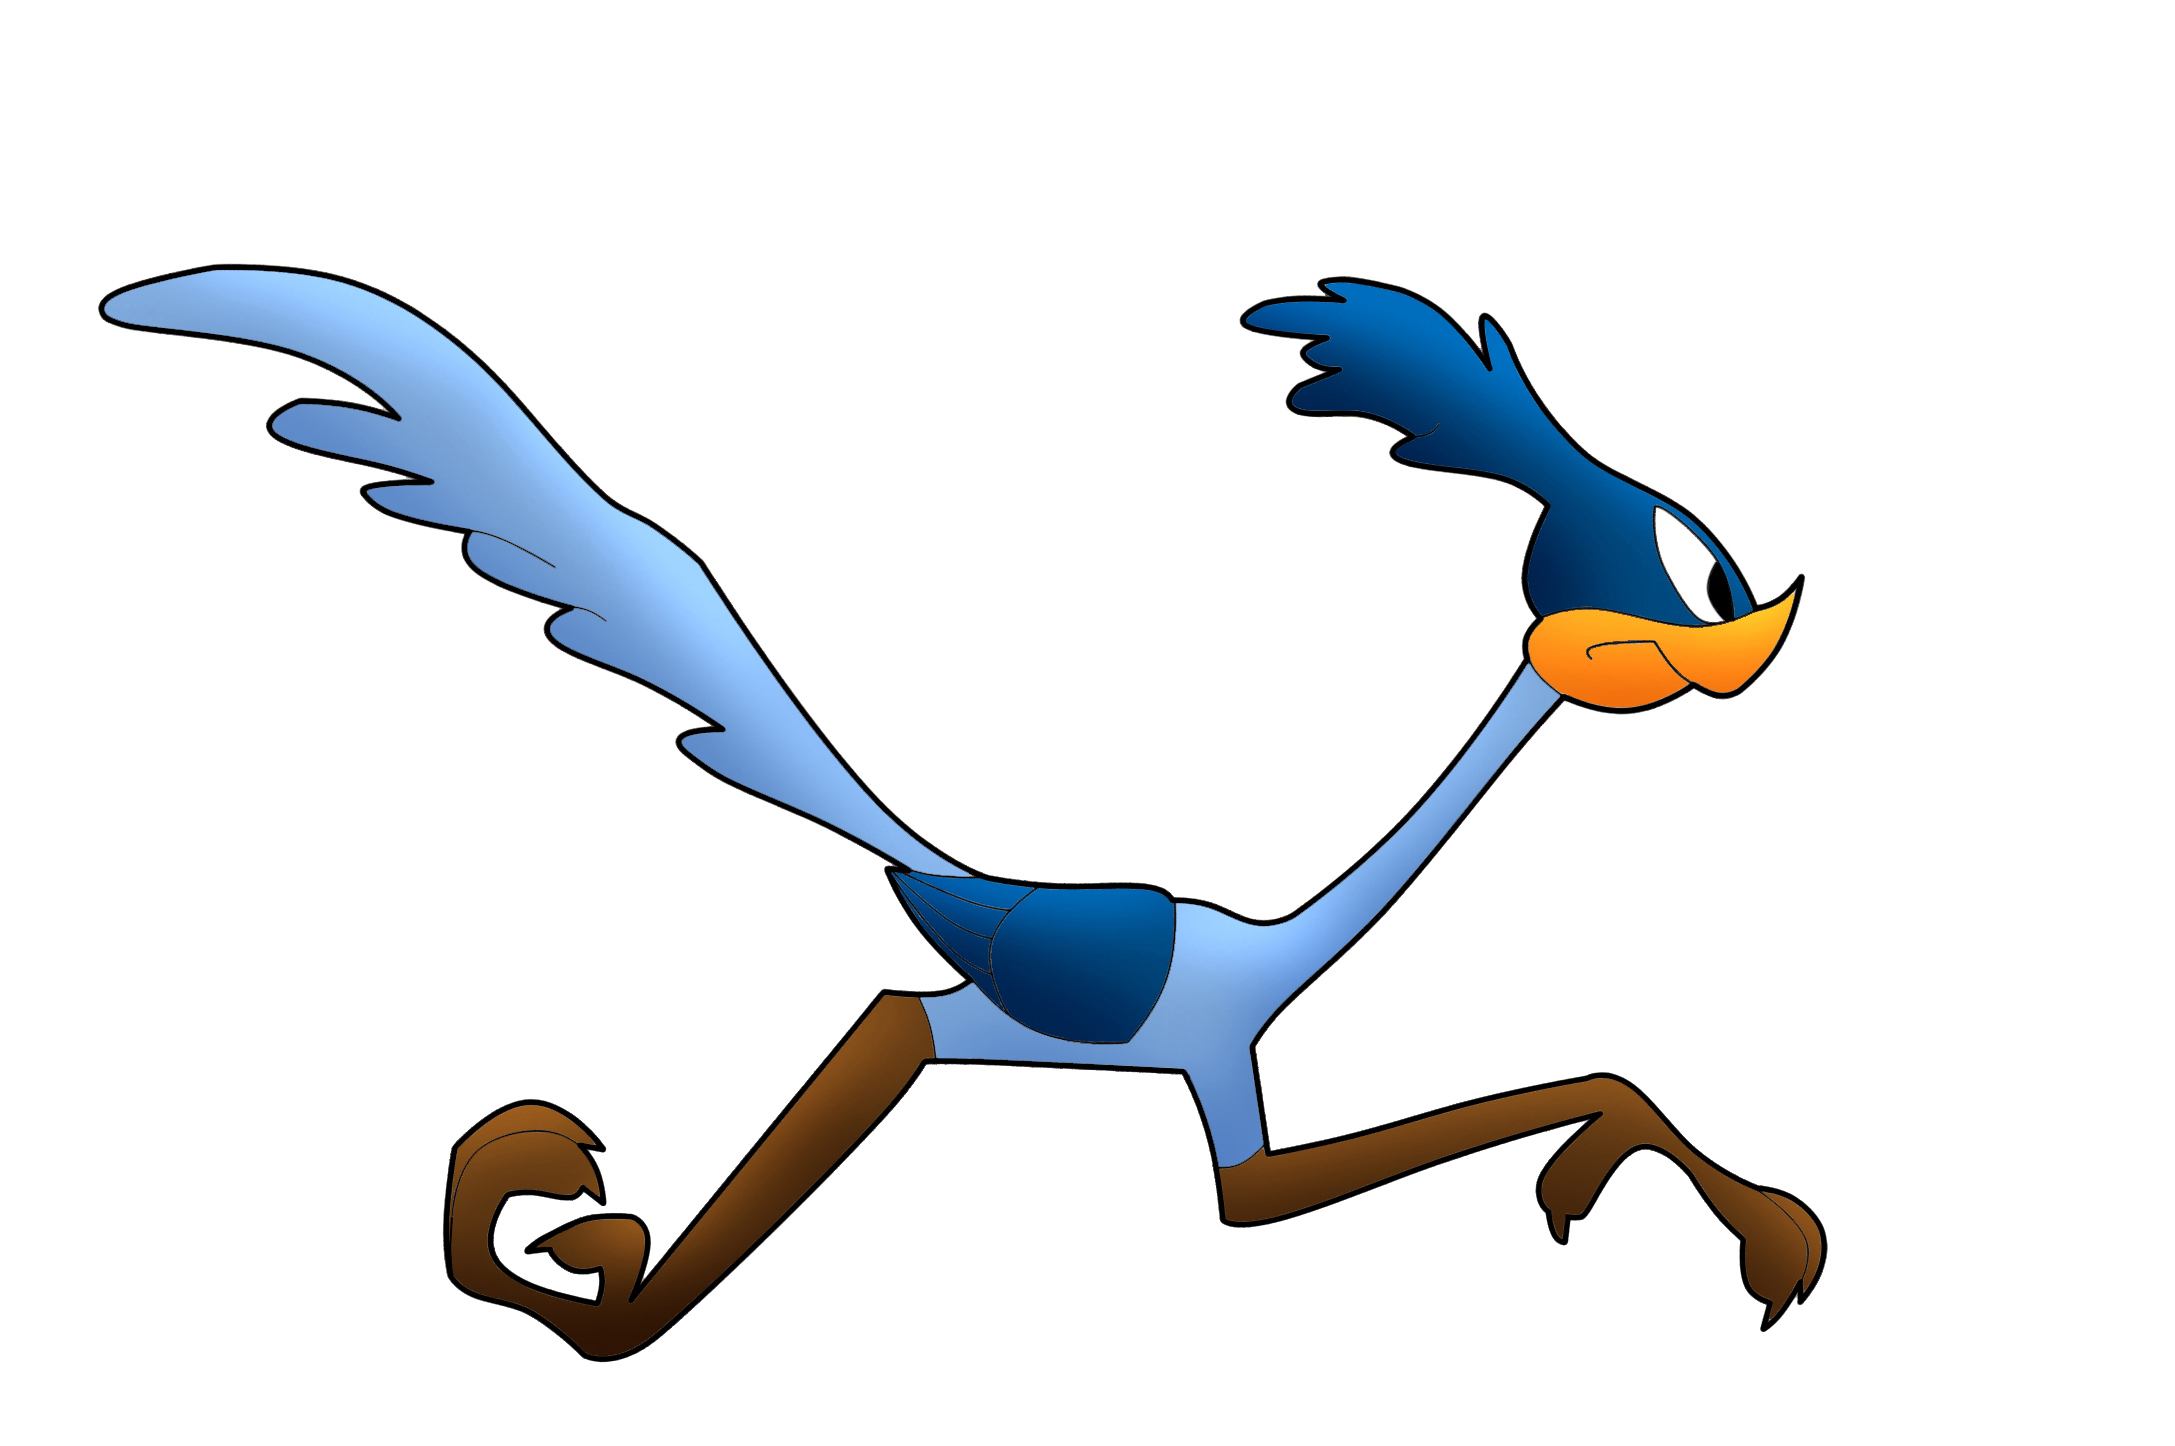 Roadrunner road runner clip art cliparts and others inspiration 2